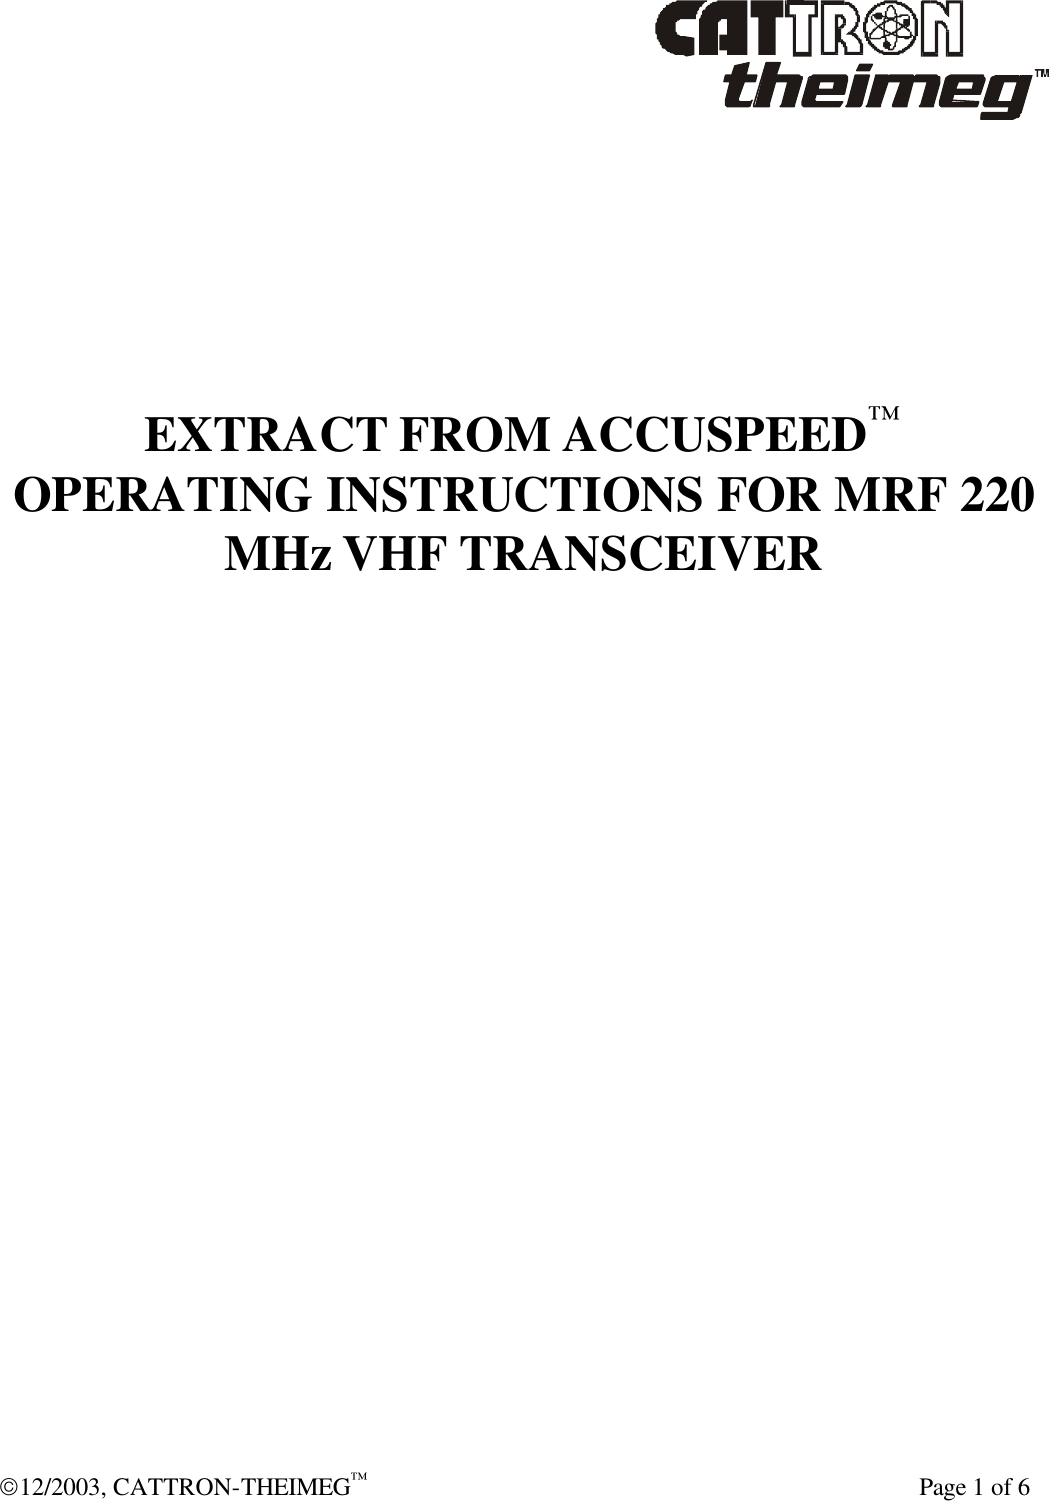  12/2003, CATTRON-THEIMEG™    Page 1 of 6     EXTRACT FROM ACCUSPEED™ OPERATING INSTRUCTIONS FOR MRF 220 MHz VHF TRANSCEIVER   